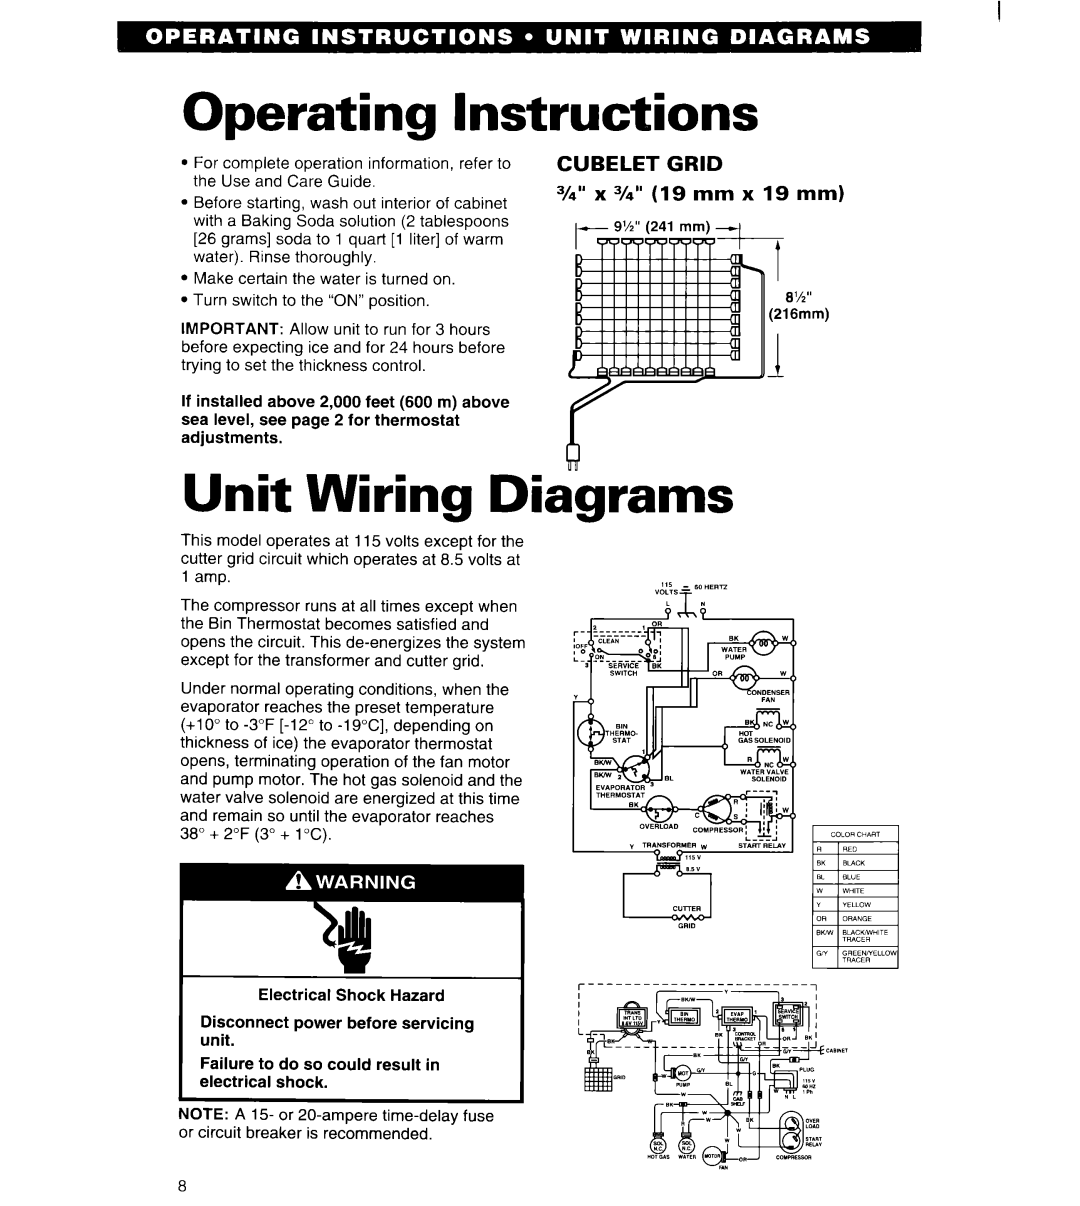 Whirlpool 2180913 manual Operating Instructions, Unit Wiring Diagrams, CUBELET GRID 3/4” x 3/i” 19 mm x 19 mm 